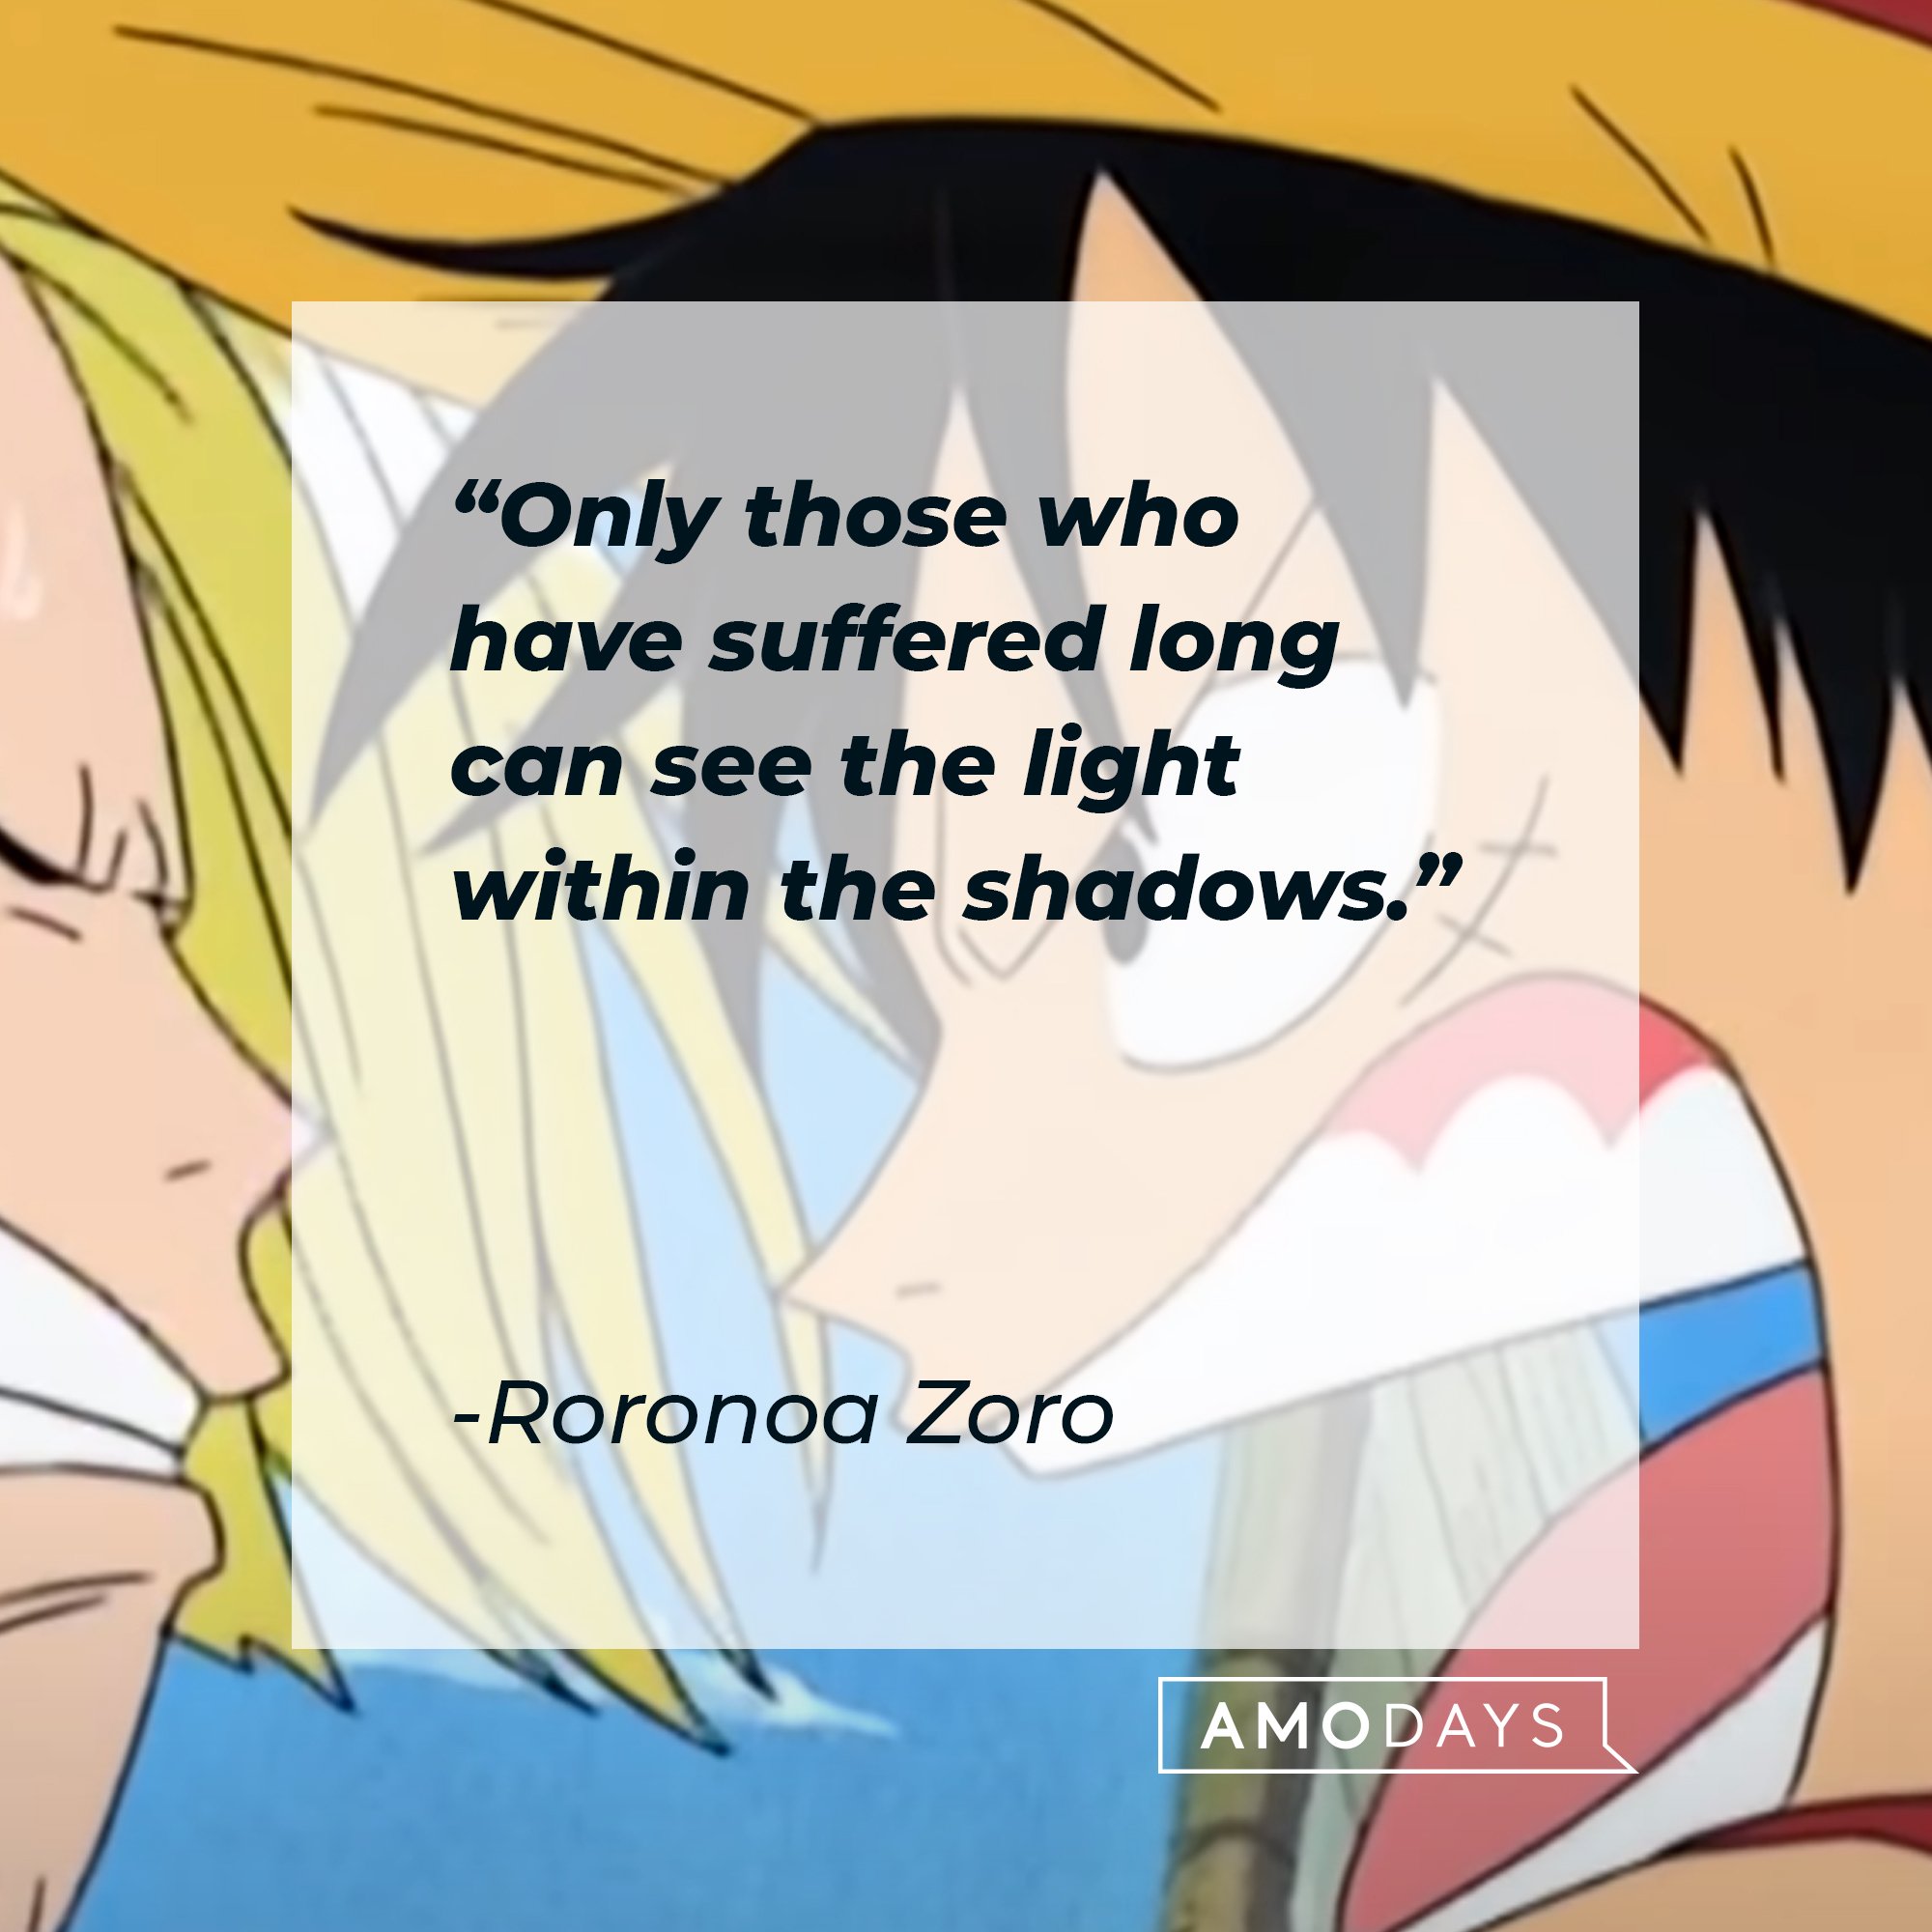  Roronoa Zoro’s quote: "Only those who have suffered long can see the light within the shadows." | Image: AmoDays